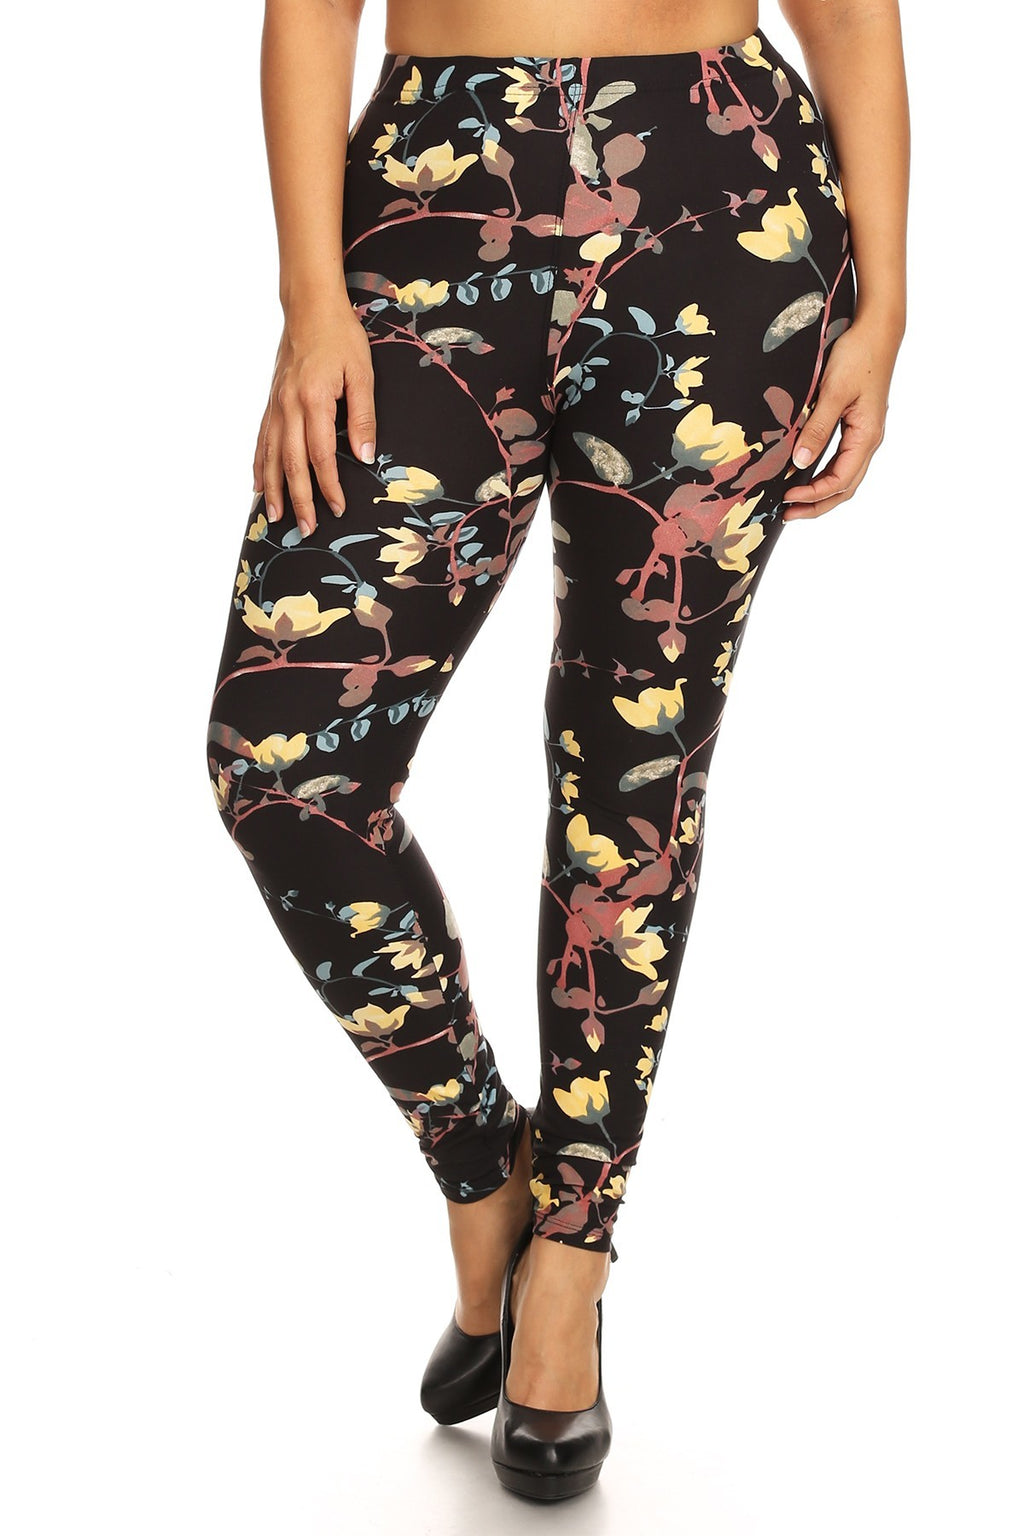 Plus Size Floral Print, Full Length Leggings In A Slim Fitting Style W